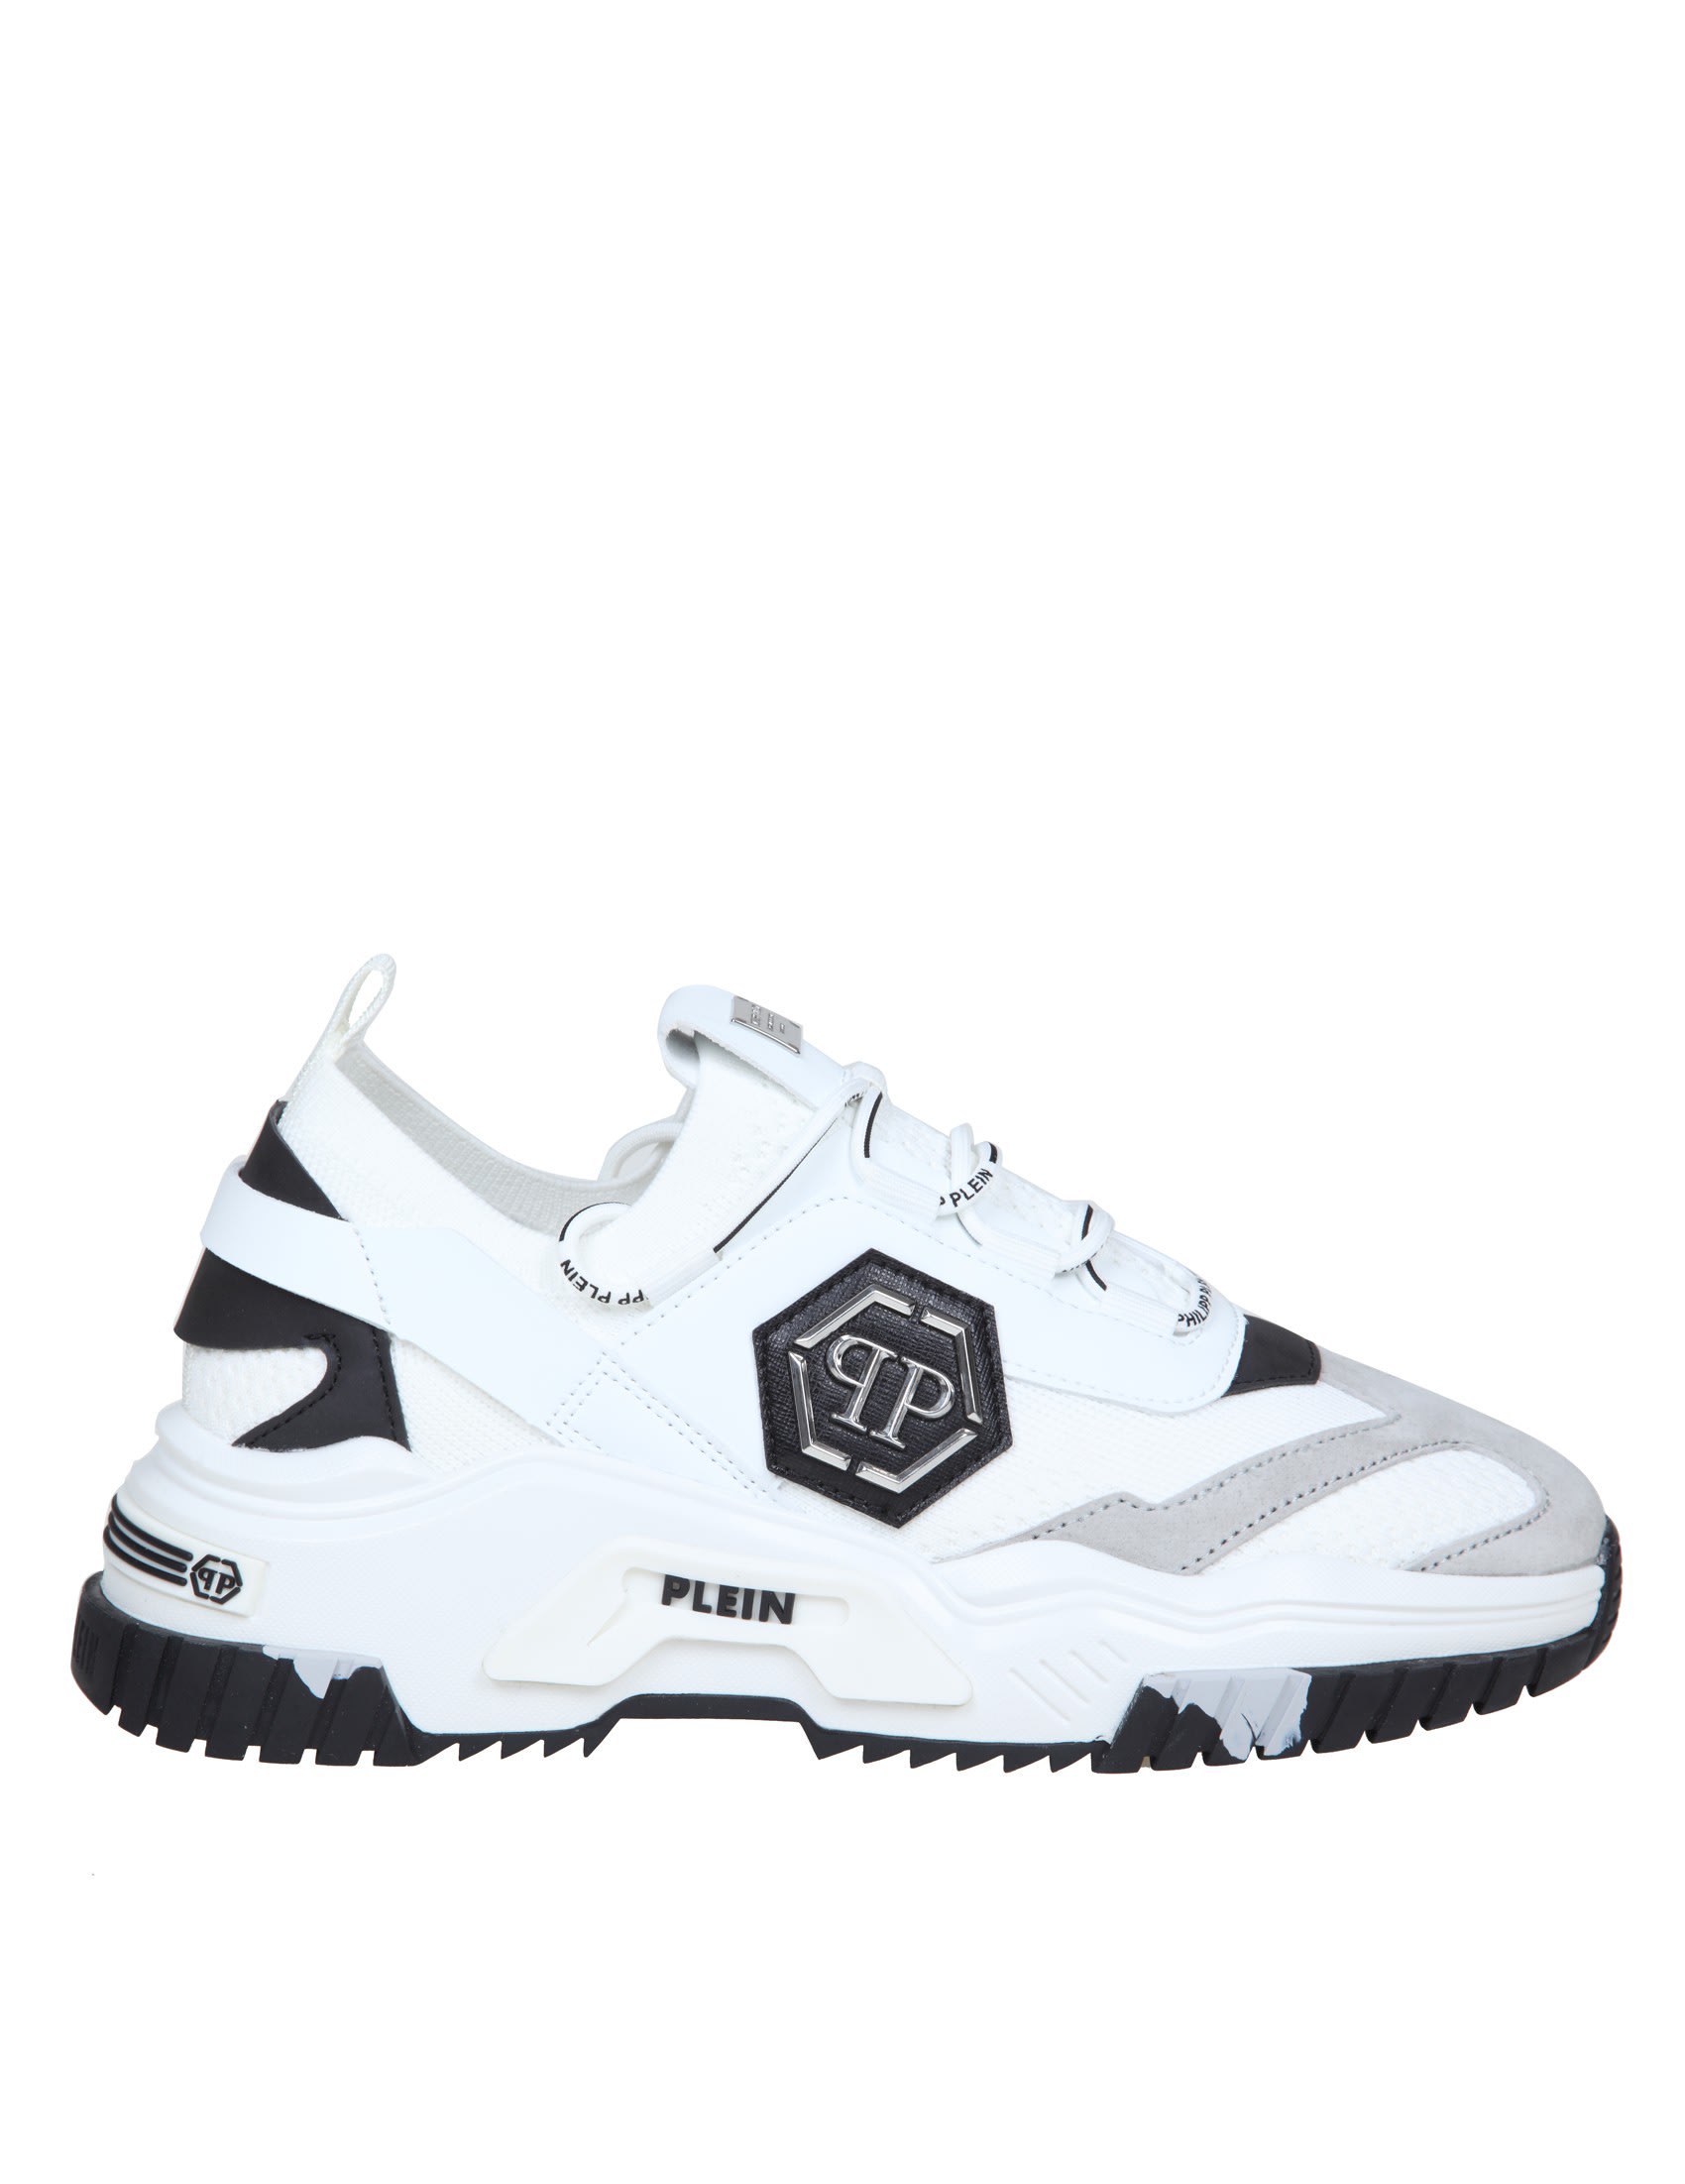 Philipp Plein Sneakers Trainer Predator In Fabric And Leather | italist, ALWAYS A SALE